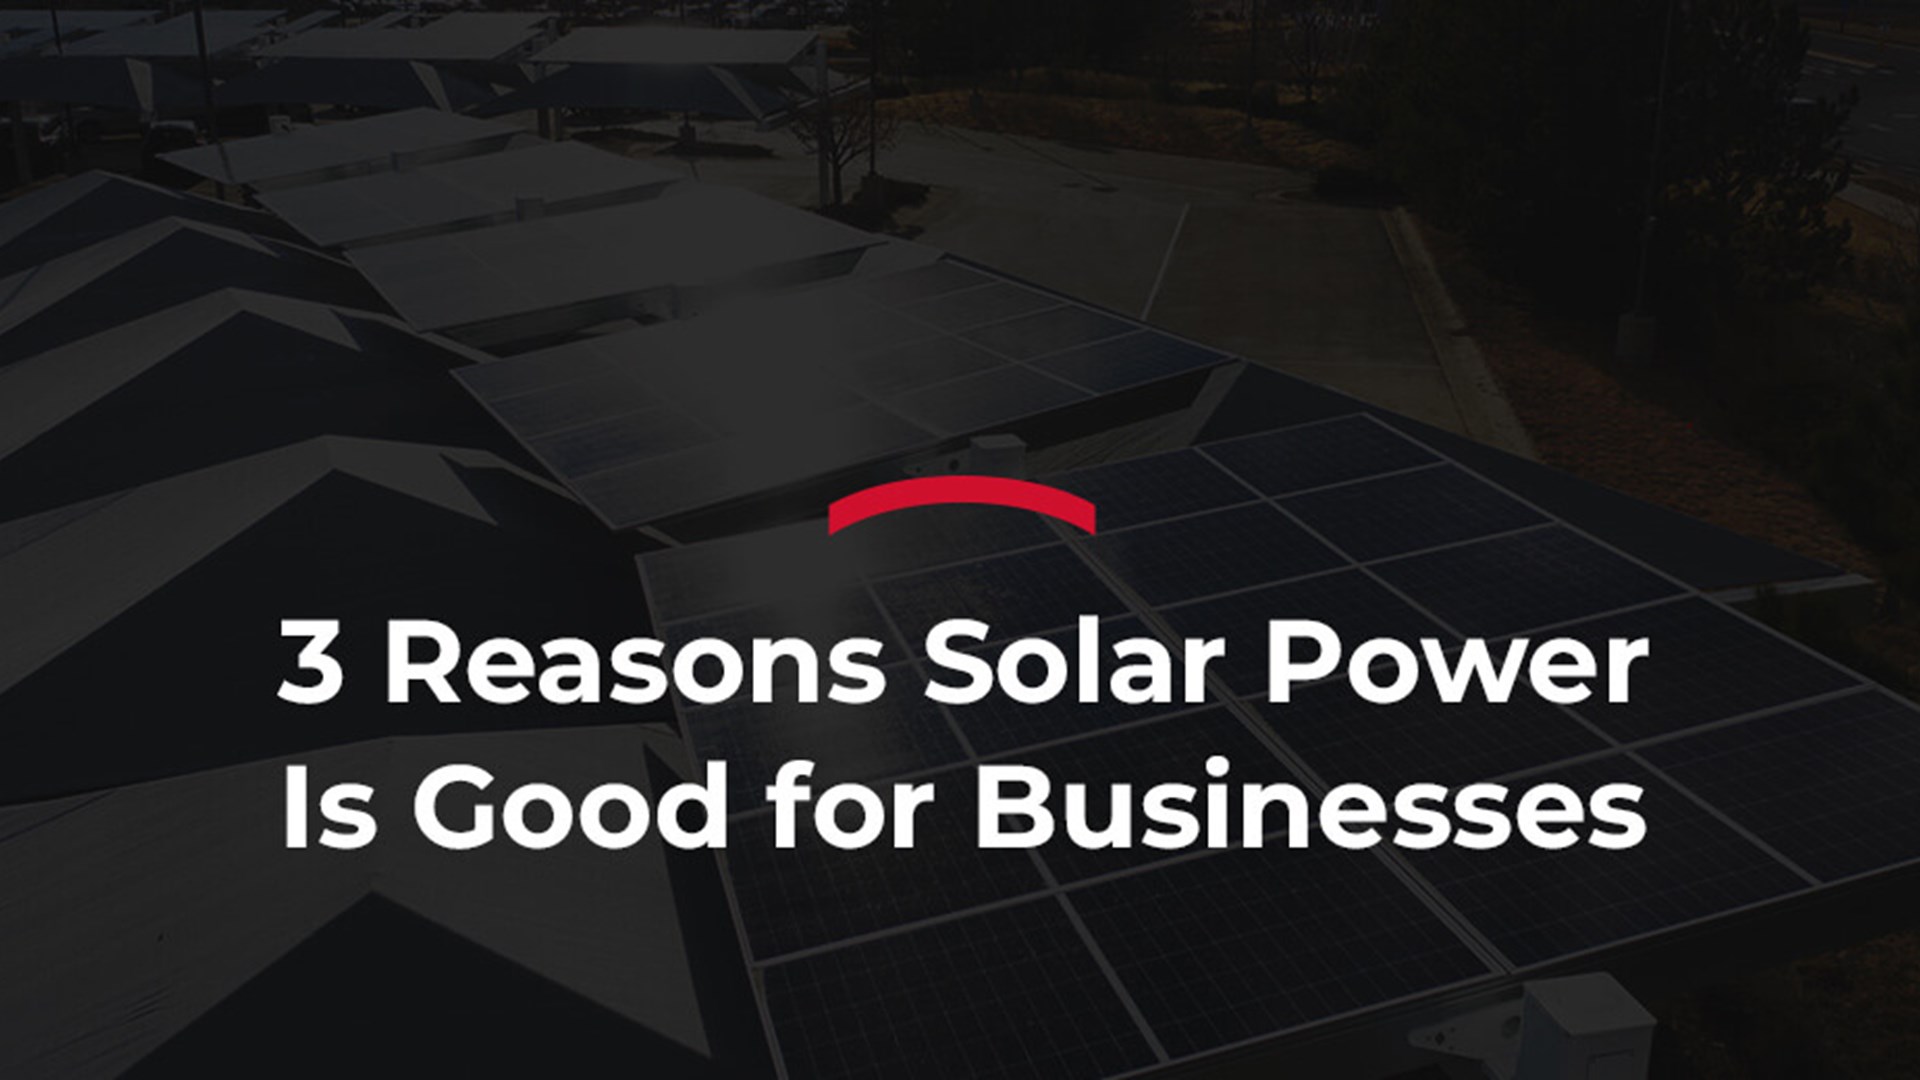 3 Reasons Solar Power is Good for Businesses